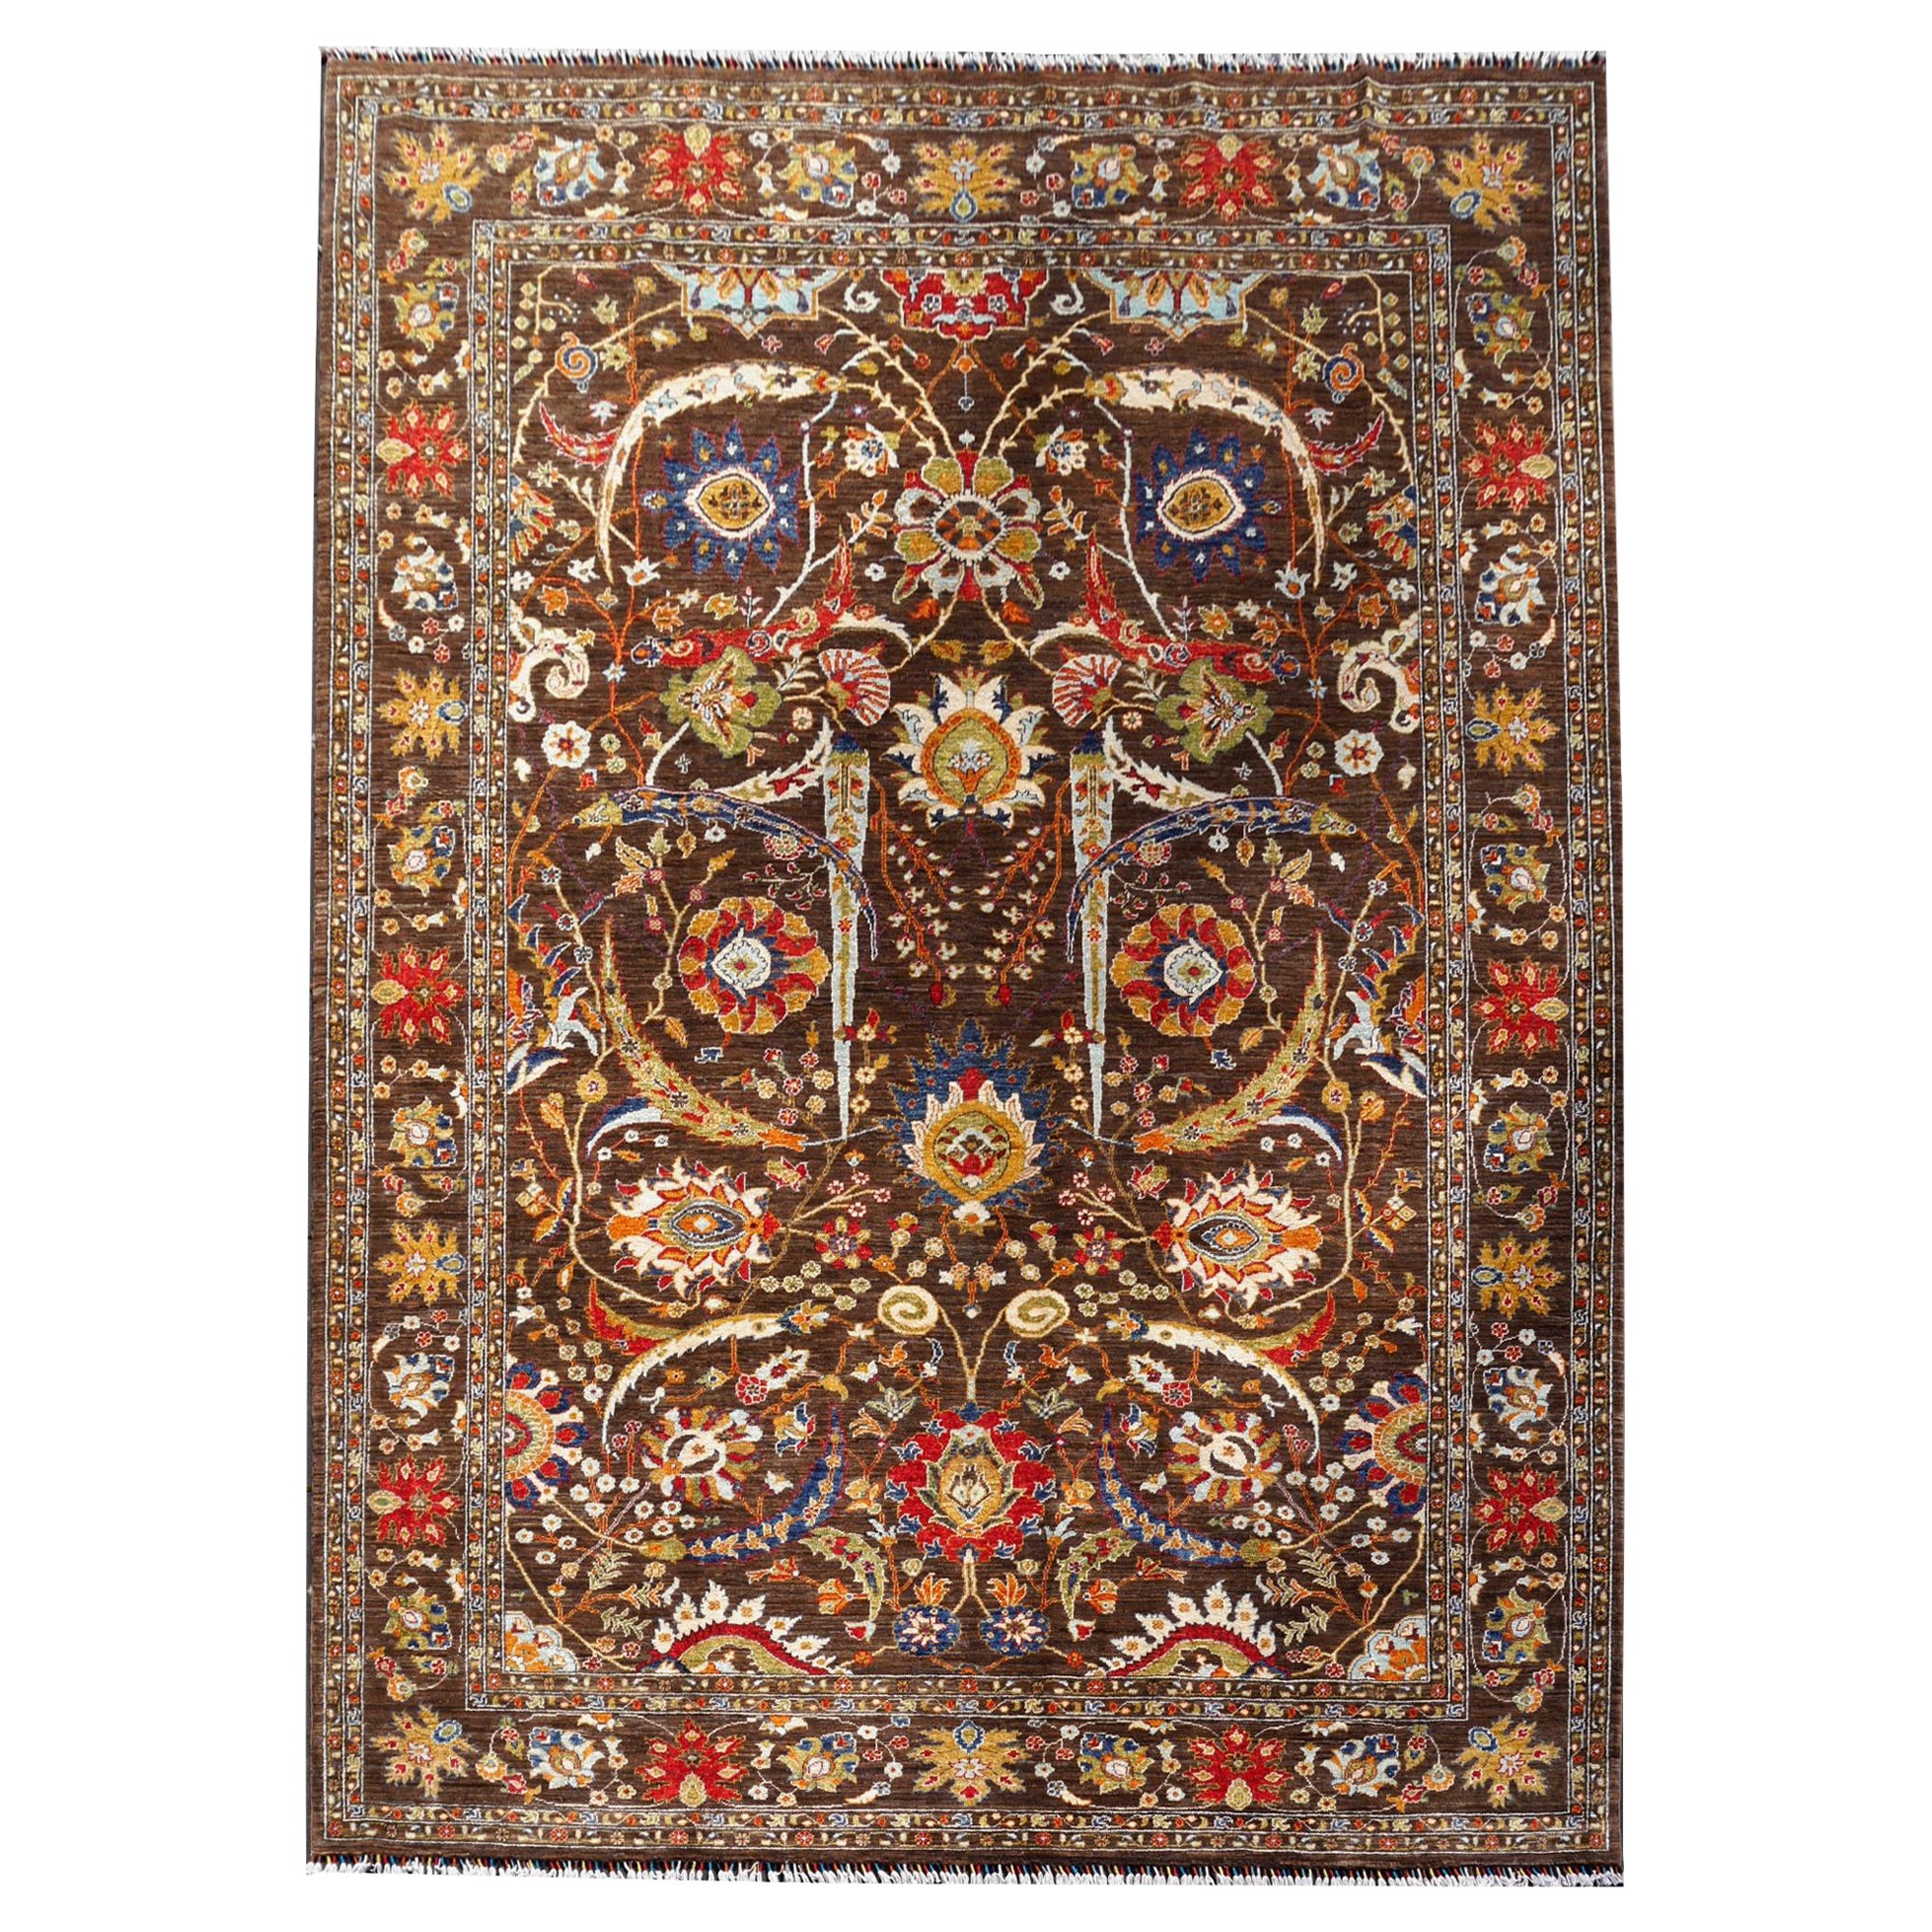 Large Sized Rug in Style of Corcoran’s Clark Sickle-Leaf Carpet Design For Sale